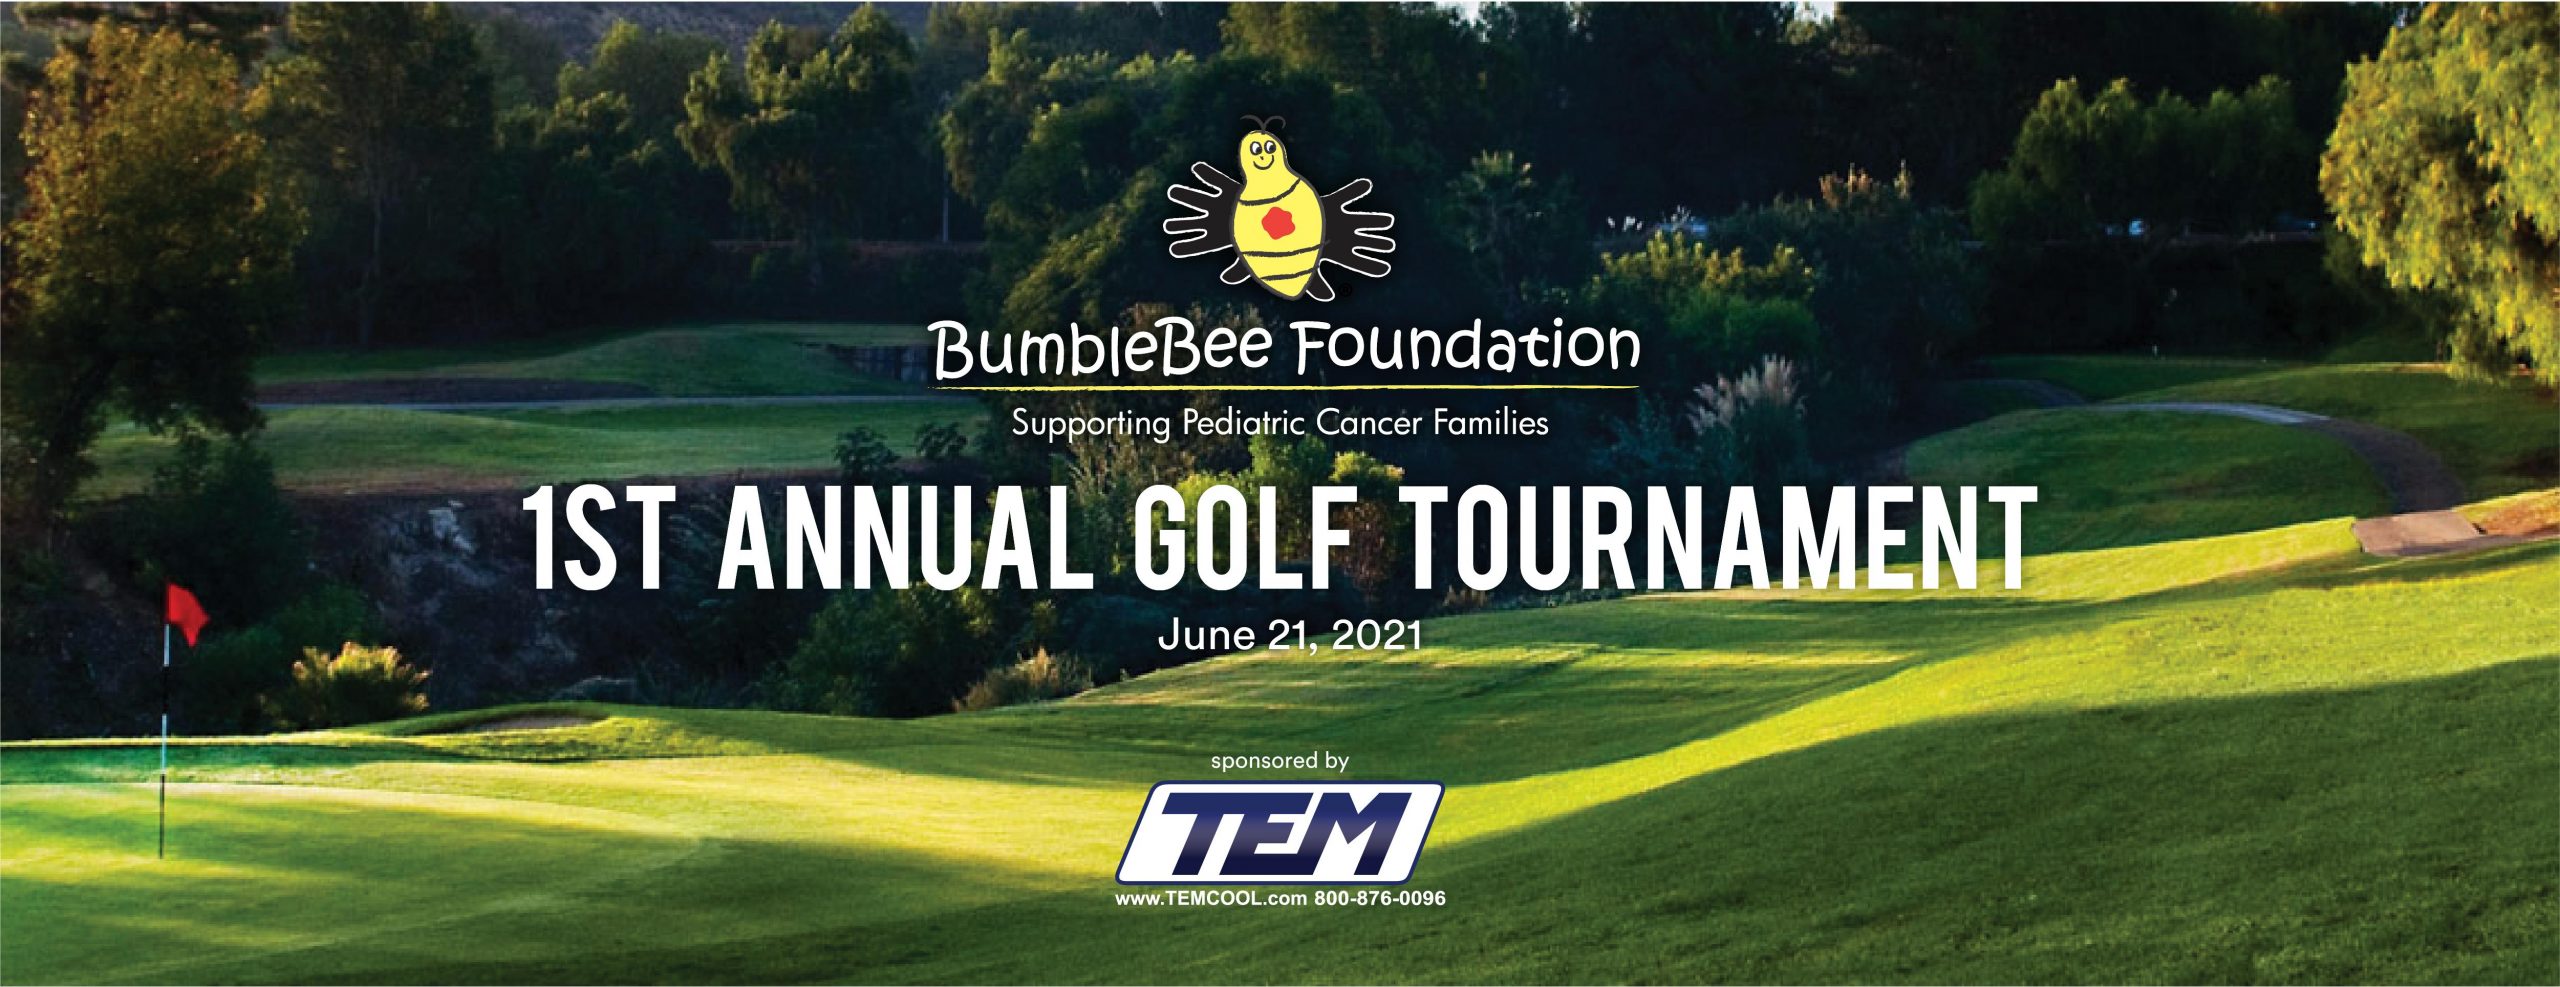 1st Annual BumbleBee Foundation Golf Tournament